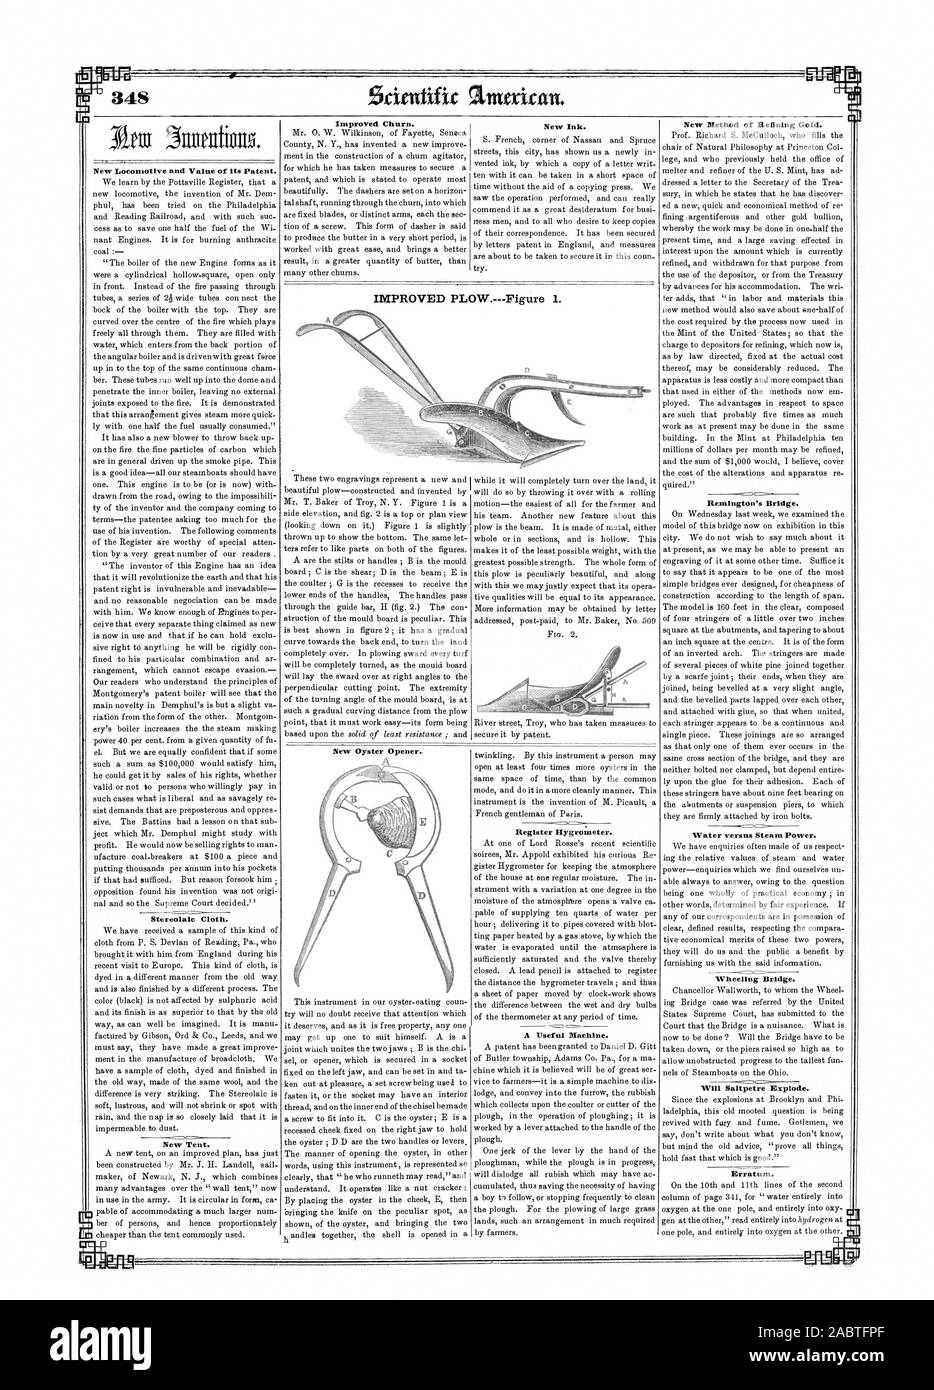 Improved Churn. New New Method of Refining Gold. New Locomotive and Value or its Patent. IMPROVED PLOW.Figure 1. E Remington's Bridge. D New Oyster Opener. D Register Hygrometer. Water versus Steam Power. Stereolale Cloth. Wheeling Bridge. A Useful Machine Will Saltpetre Explode. New Tent, scientific american, 1850-07-20 Stock Photo